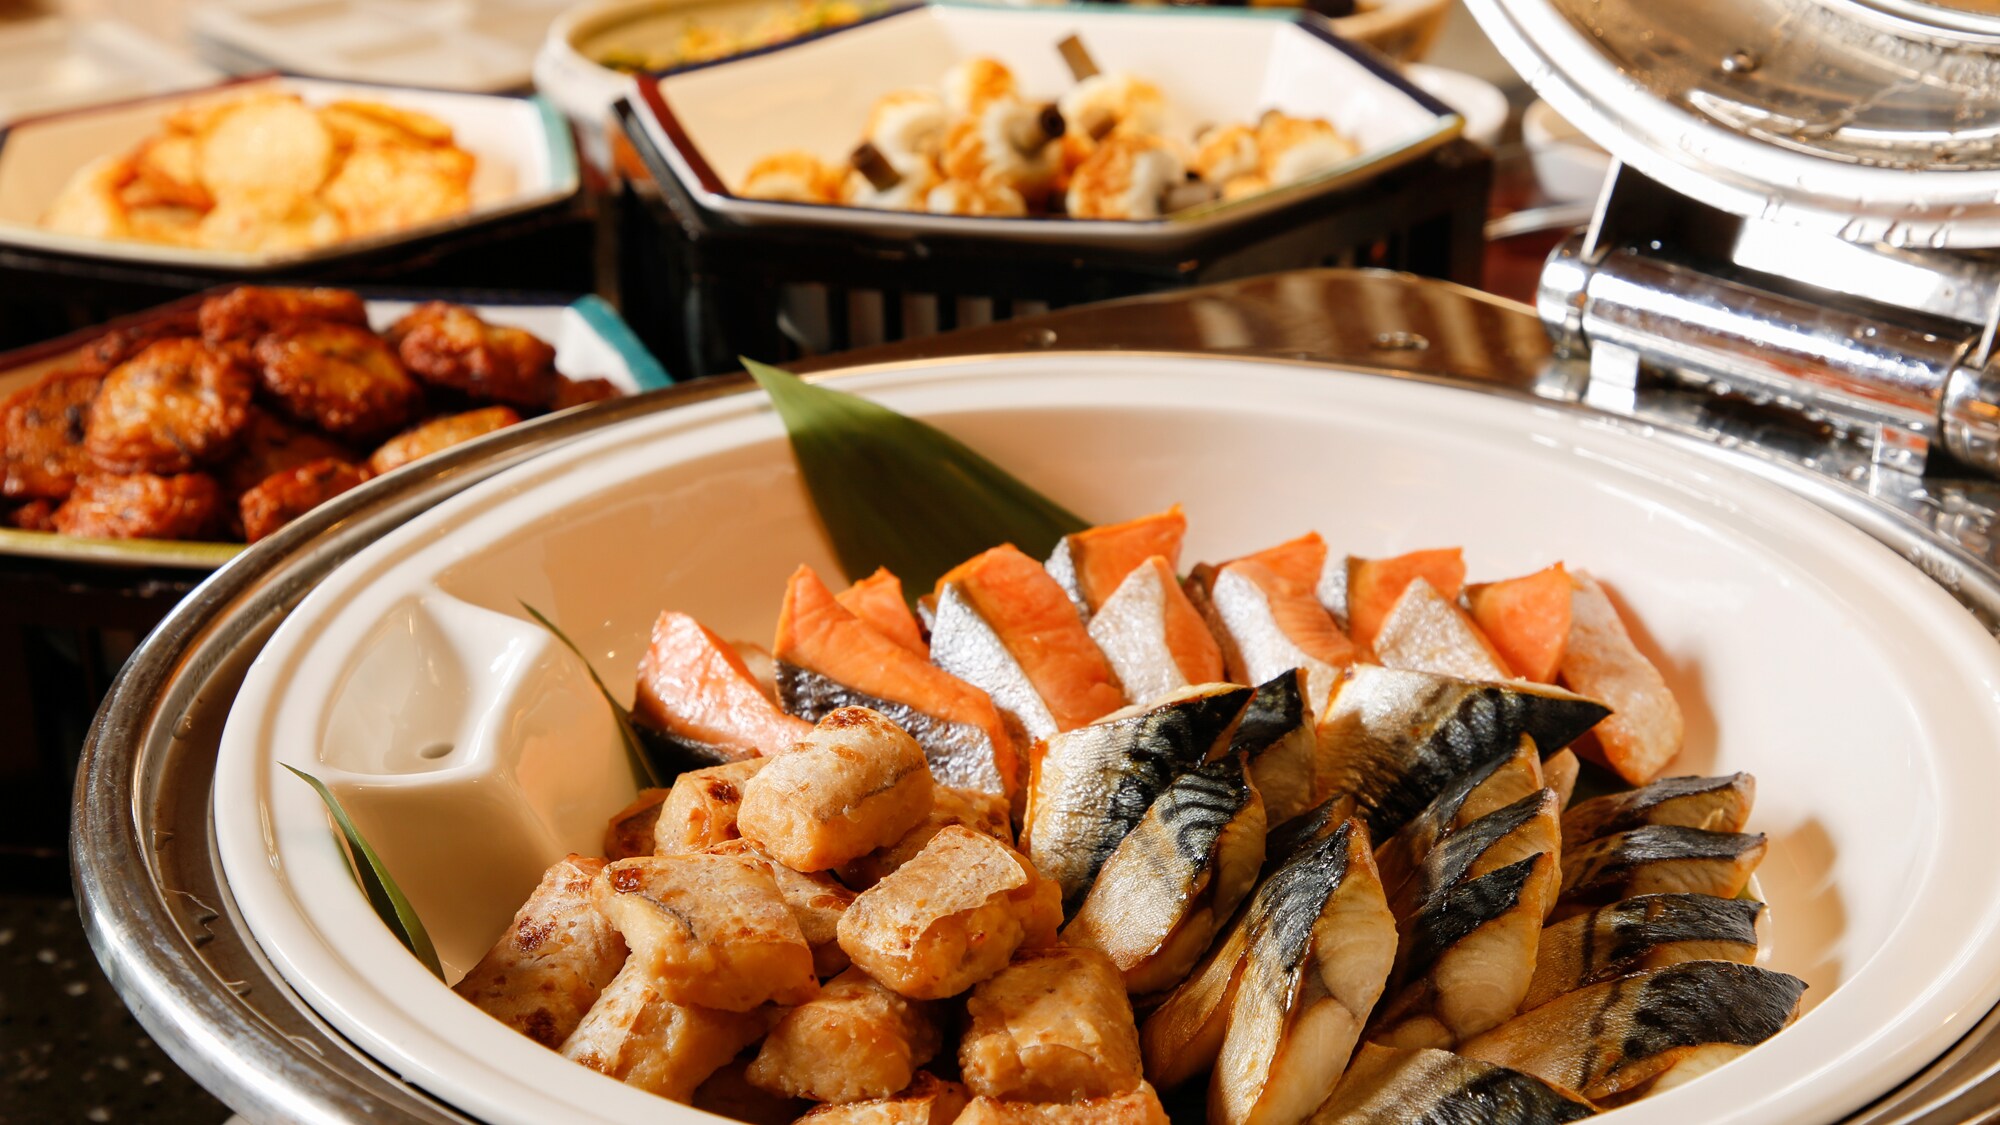 For breakfast, please enjoy your favorite Japanese-style buffet ≪Cooking image≫